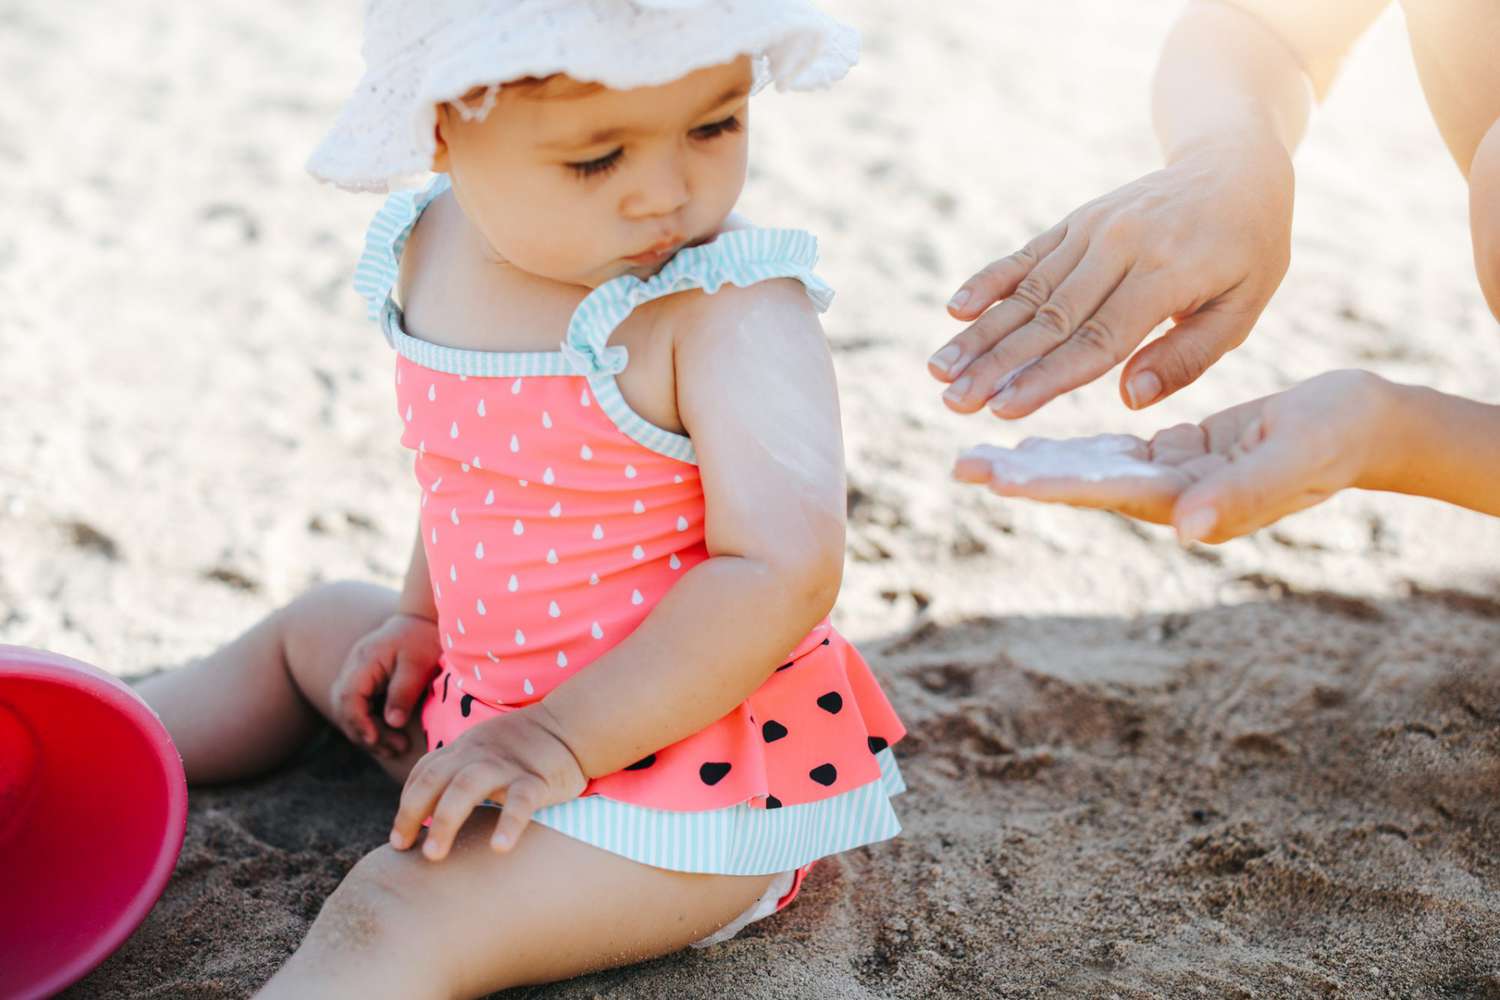 How to Soothe a Baby's Sunburn